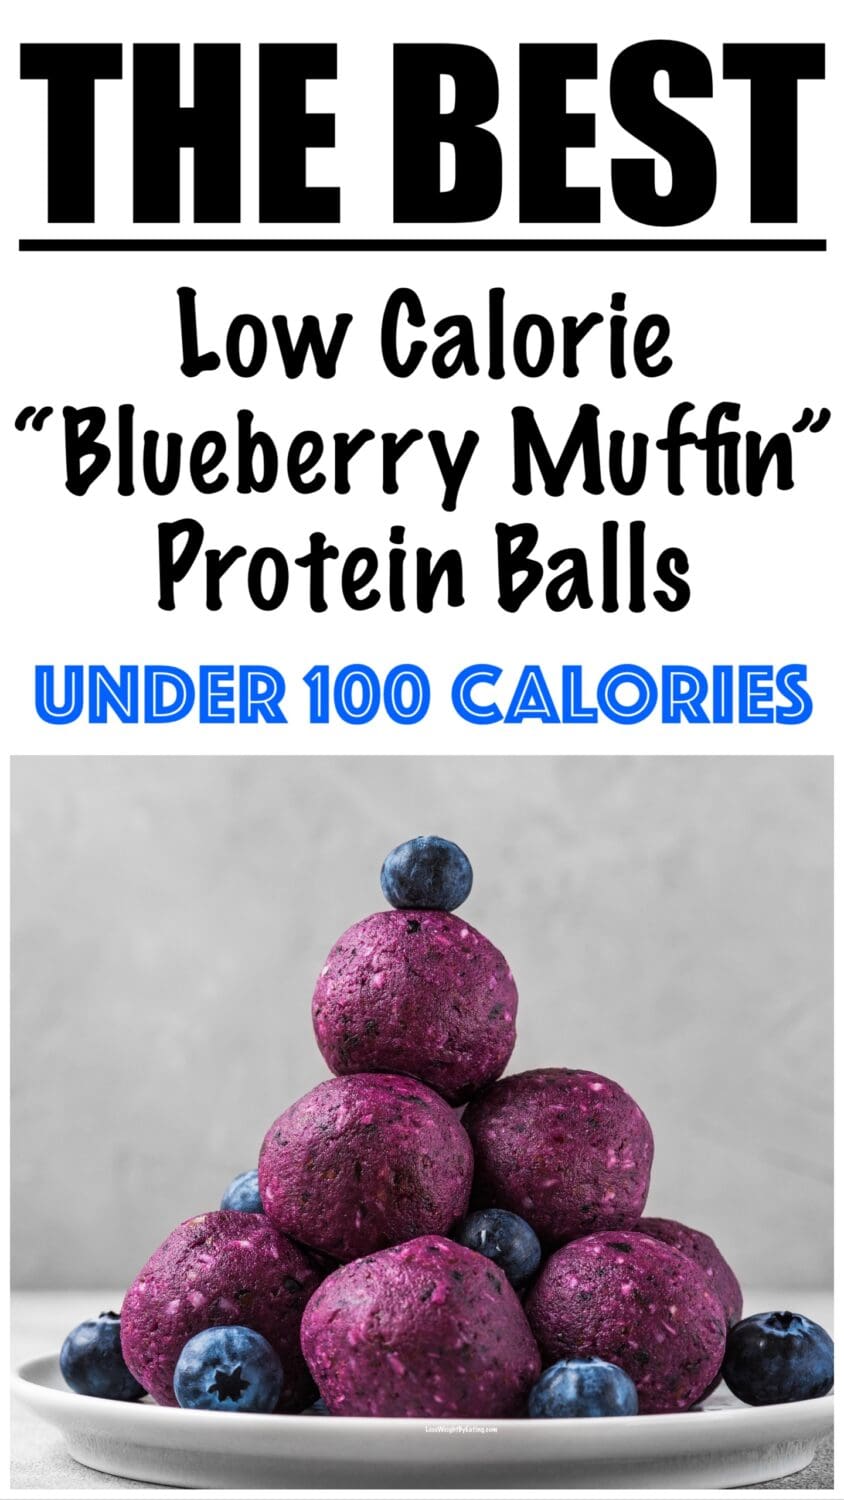 Low Calorie Blueberry Protein Balls